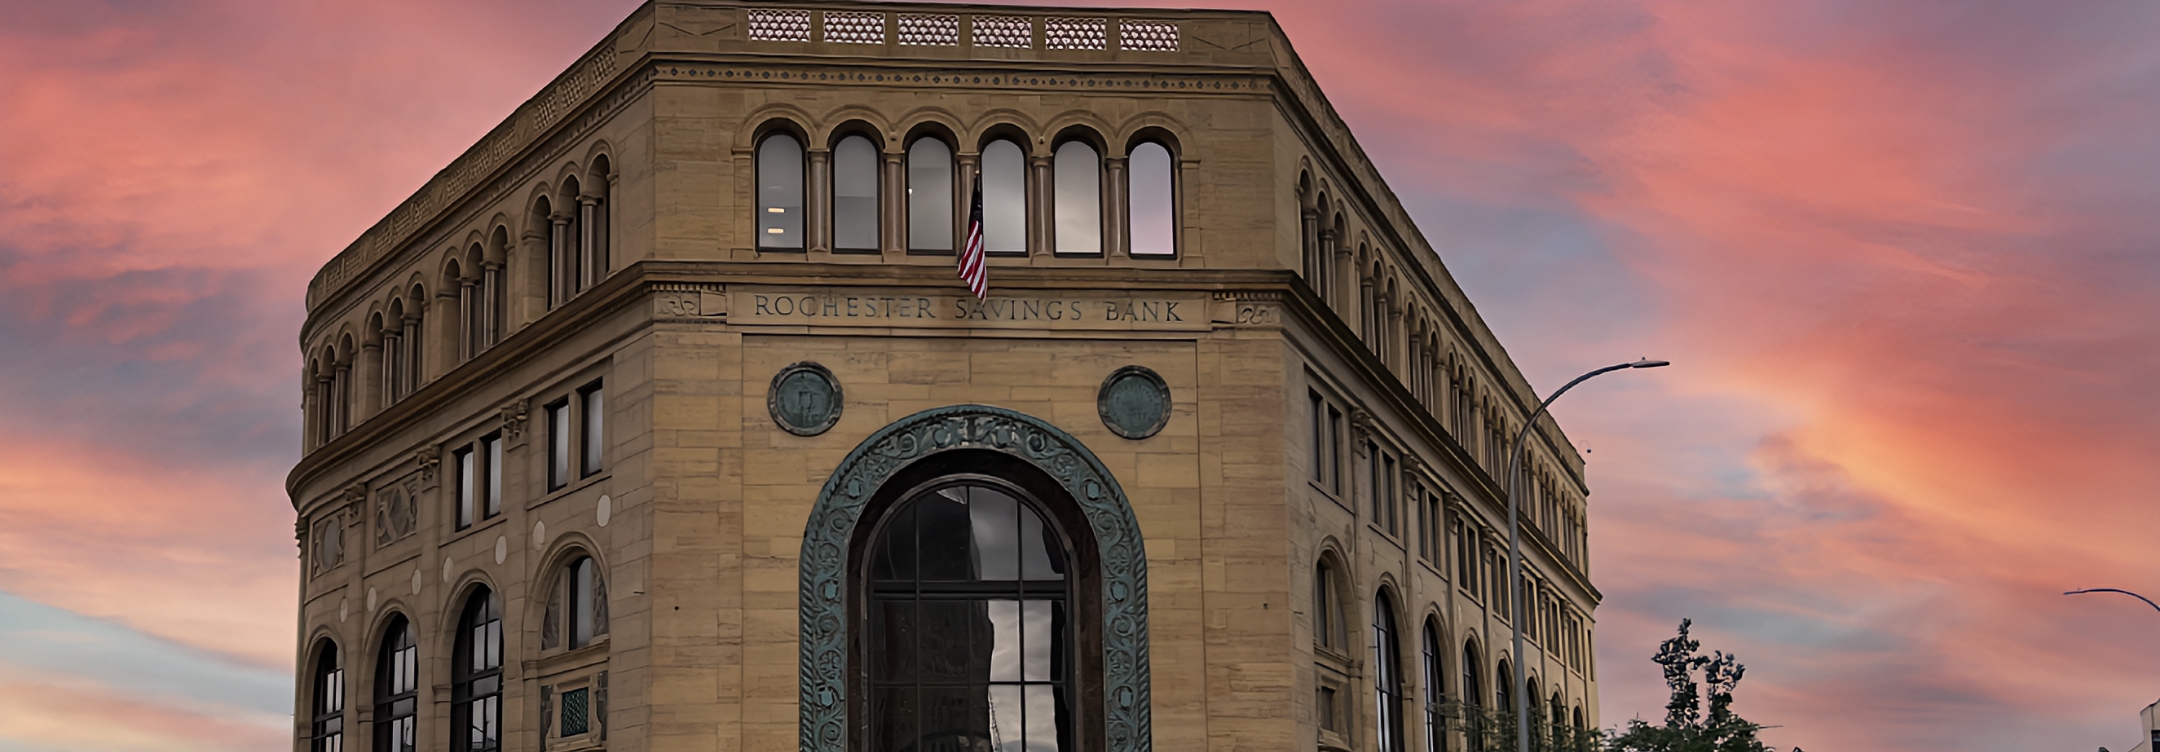 Rochester Savings Bank Exterior shot with beautiful sunset background.